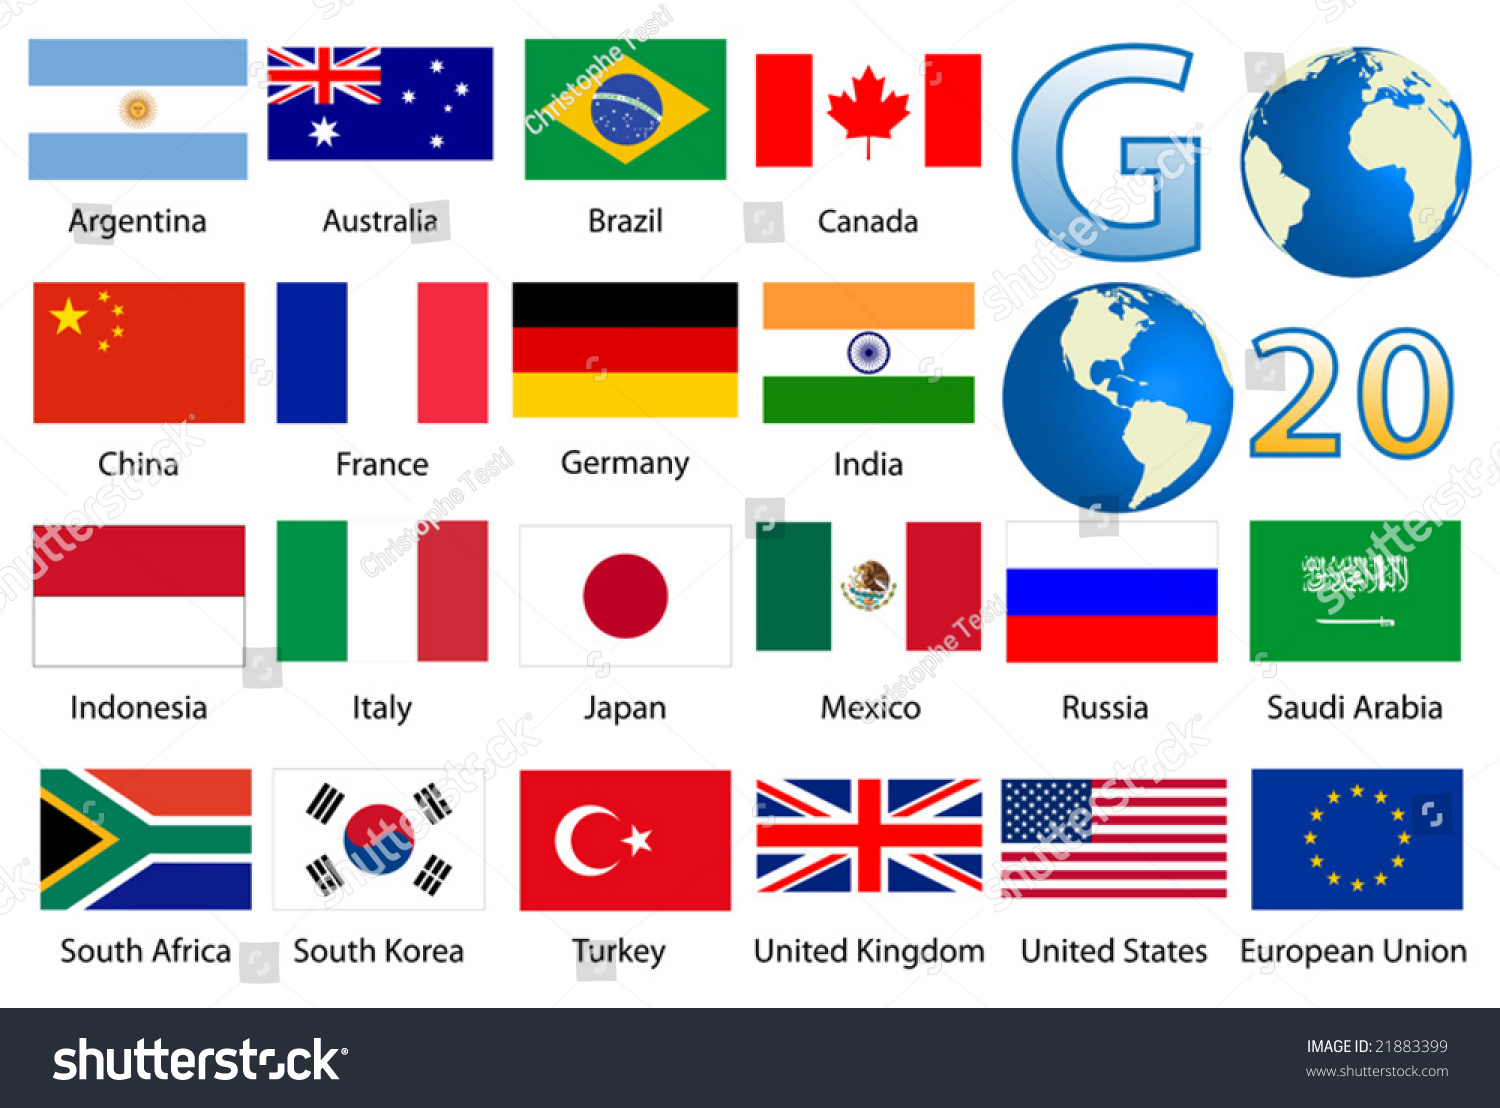 clipart of flags for countries - photo #50